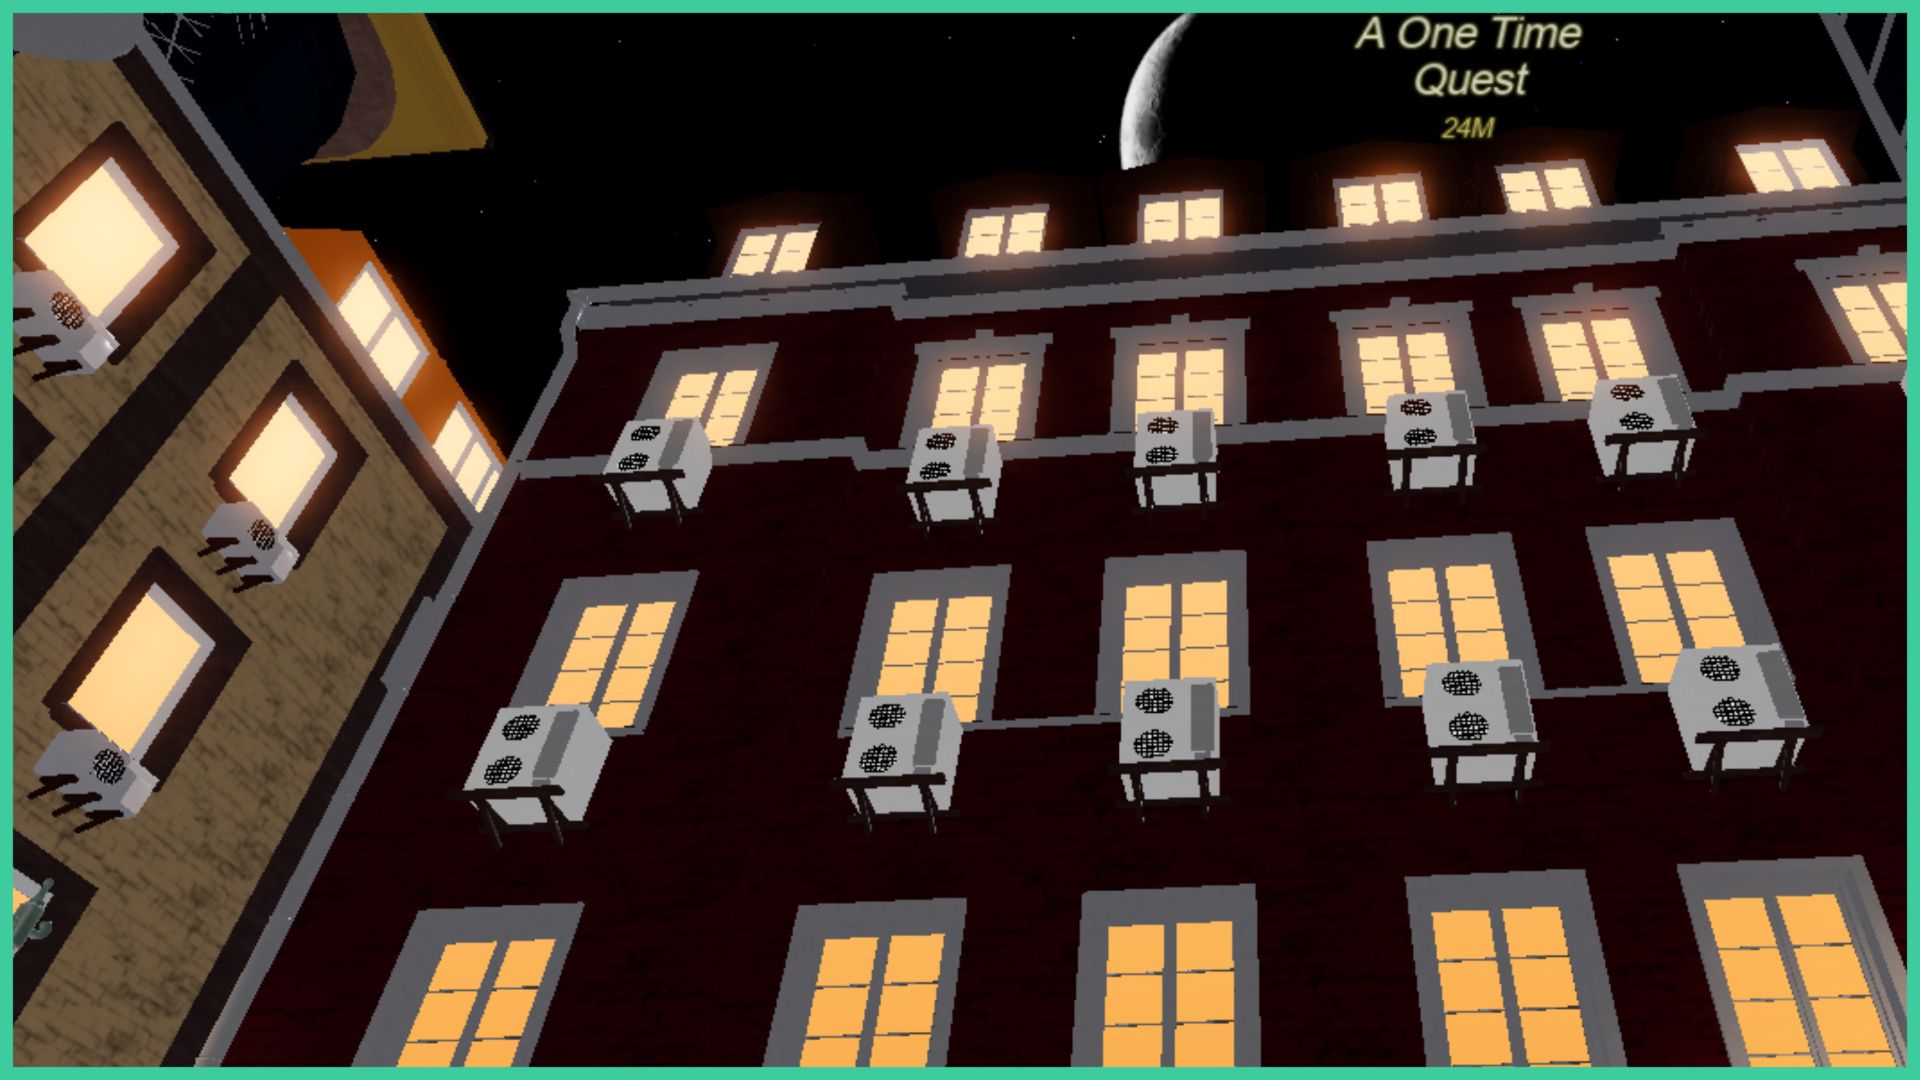 feature image for our robending boss drops guide, the image is a screenshot of two lit up buildings in the main town of the game, with multiple floors and fan systems on the outside brickwork, you can see the moon behind the buildings as well as the quest name written at the top of the screen that reads 'a one time quest', there are also stars in the sky